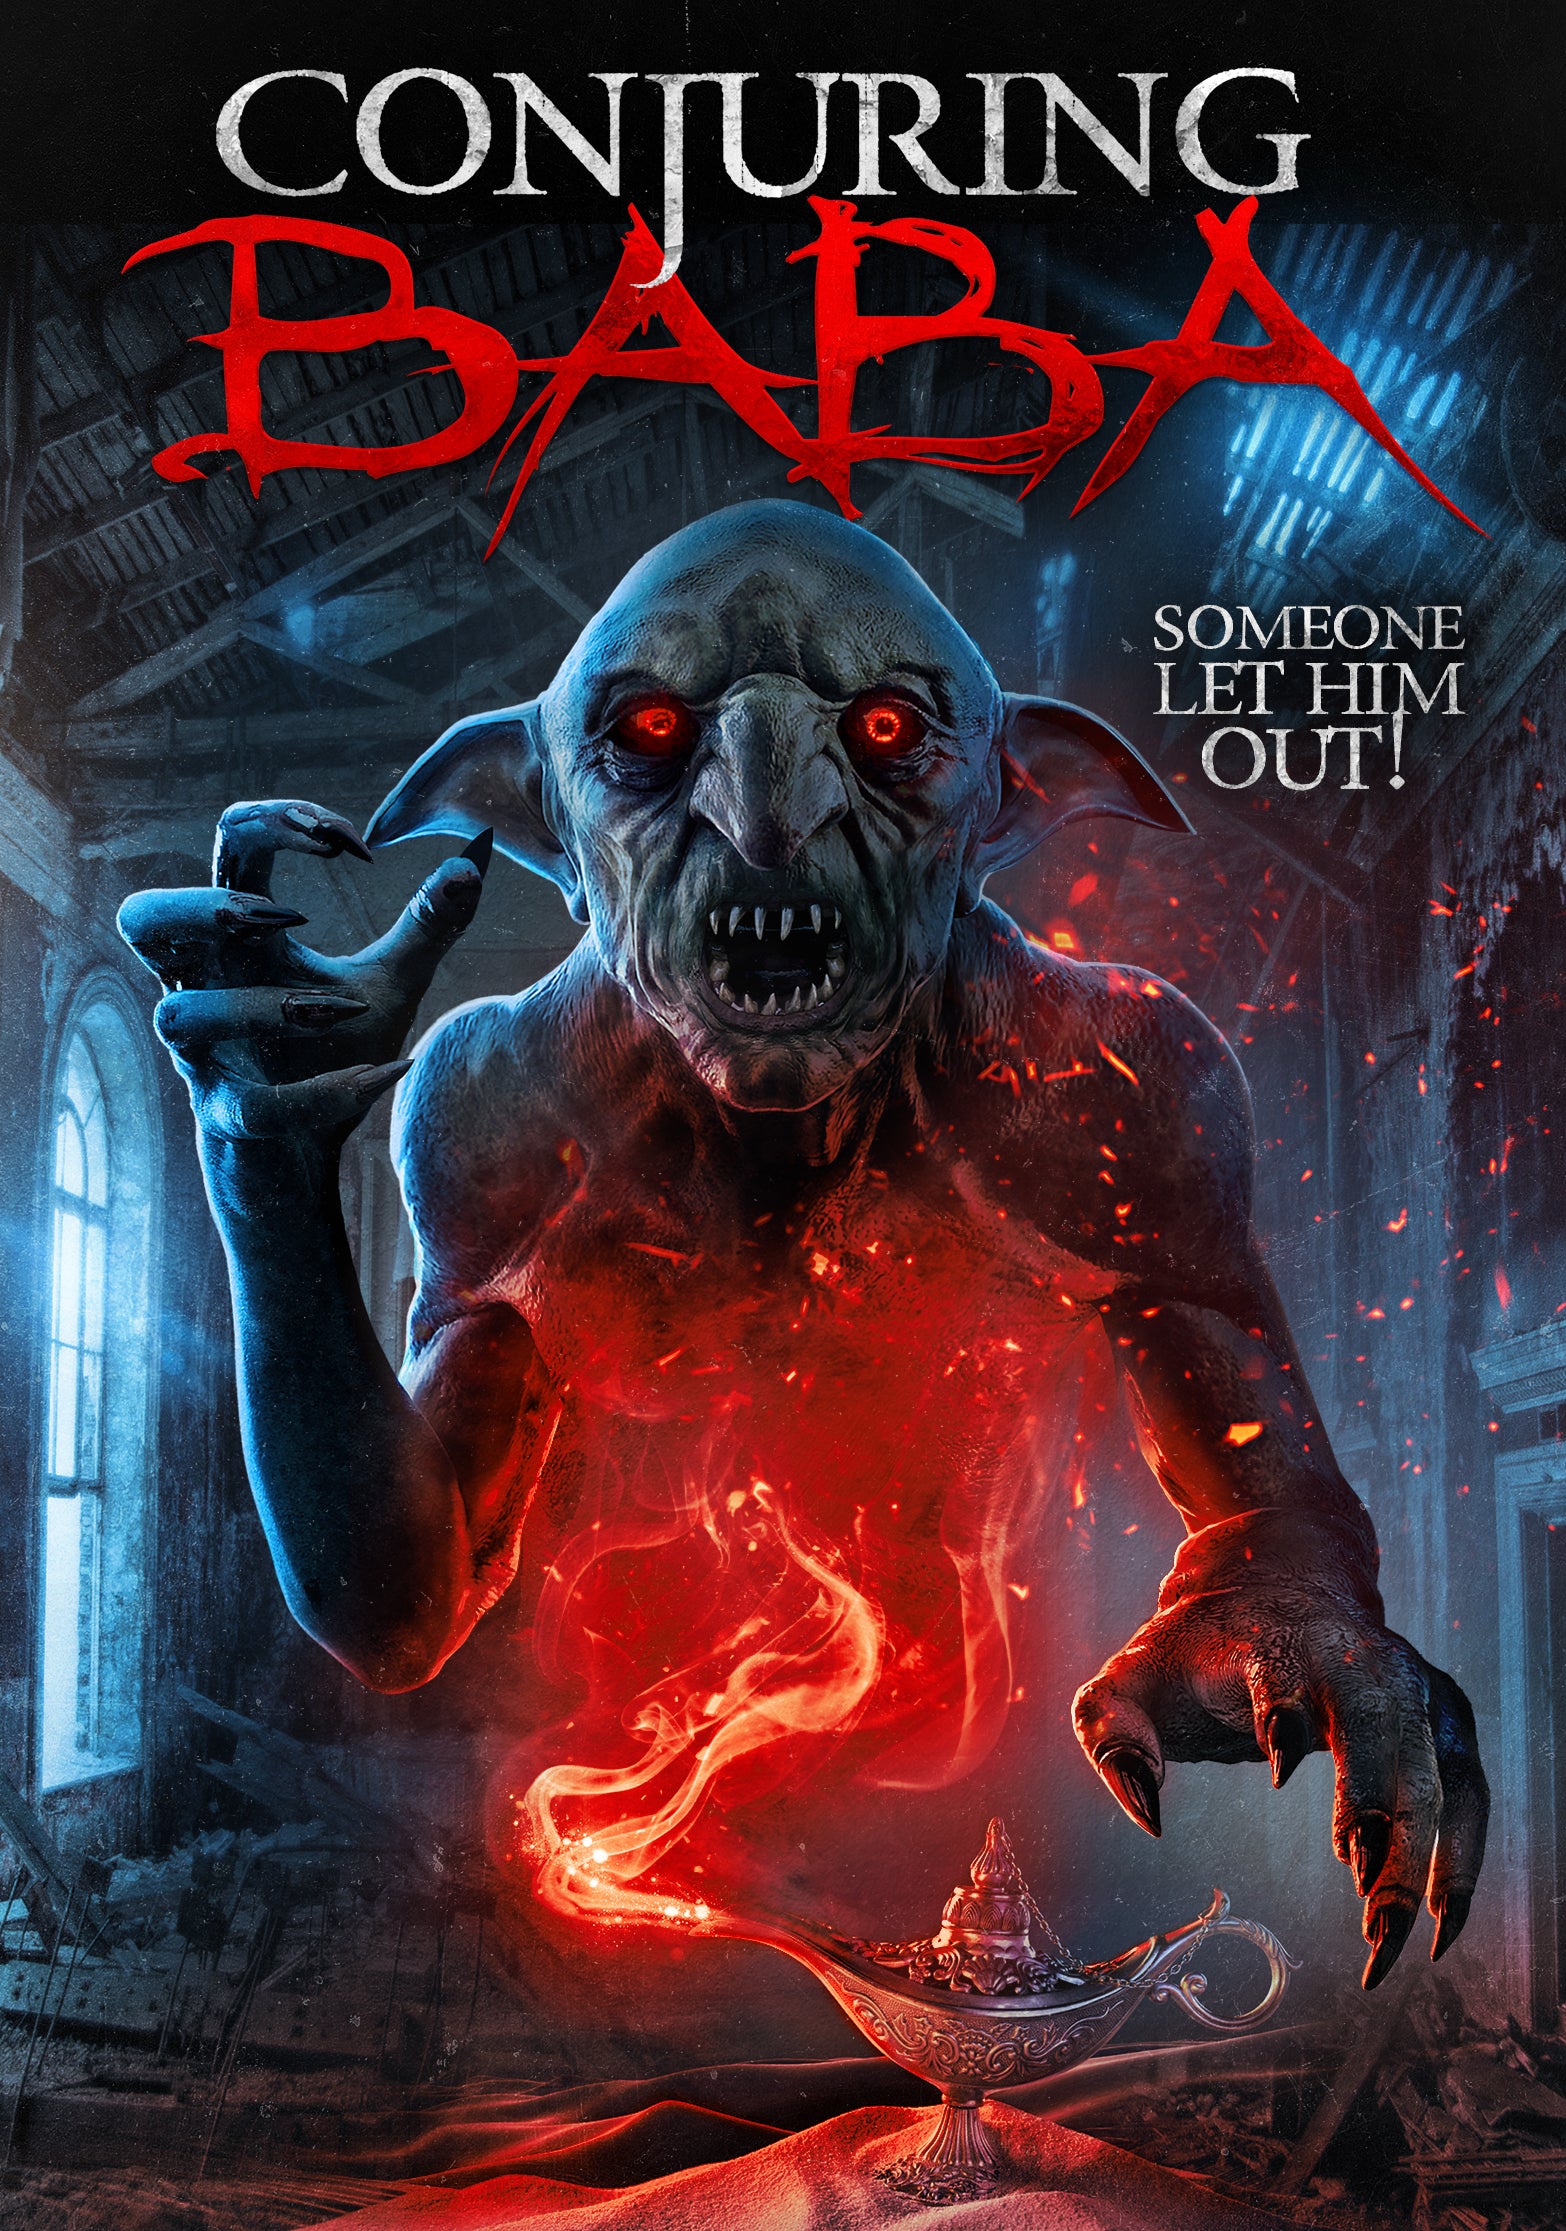 CONJURING BABA DVD